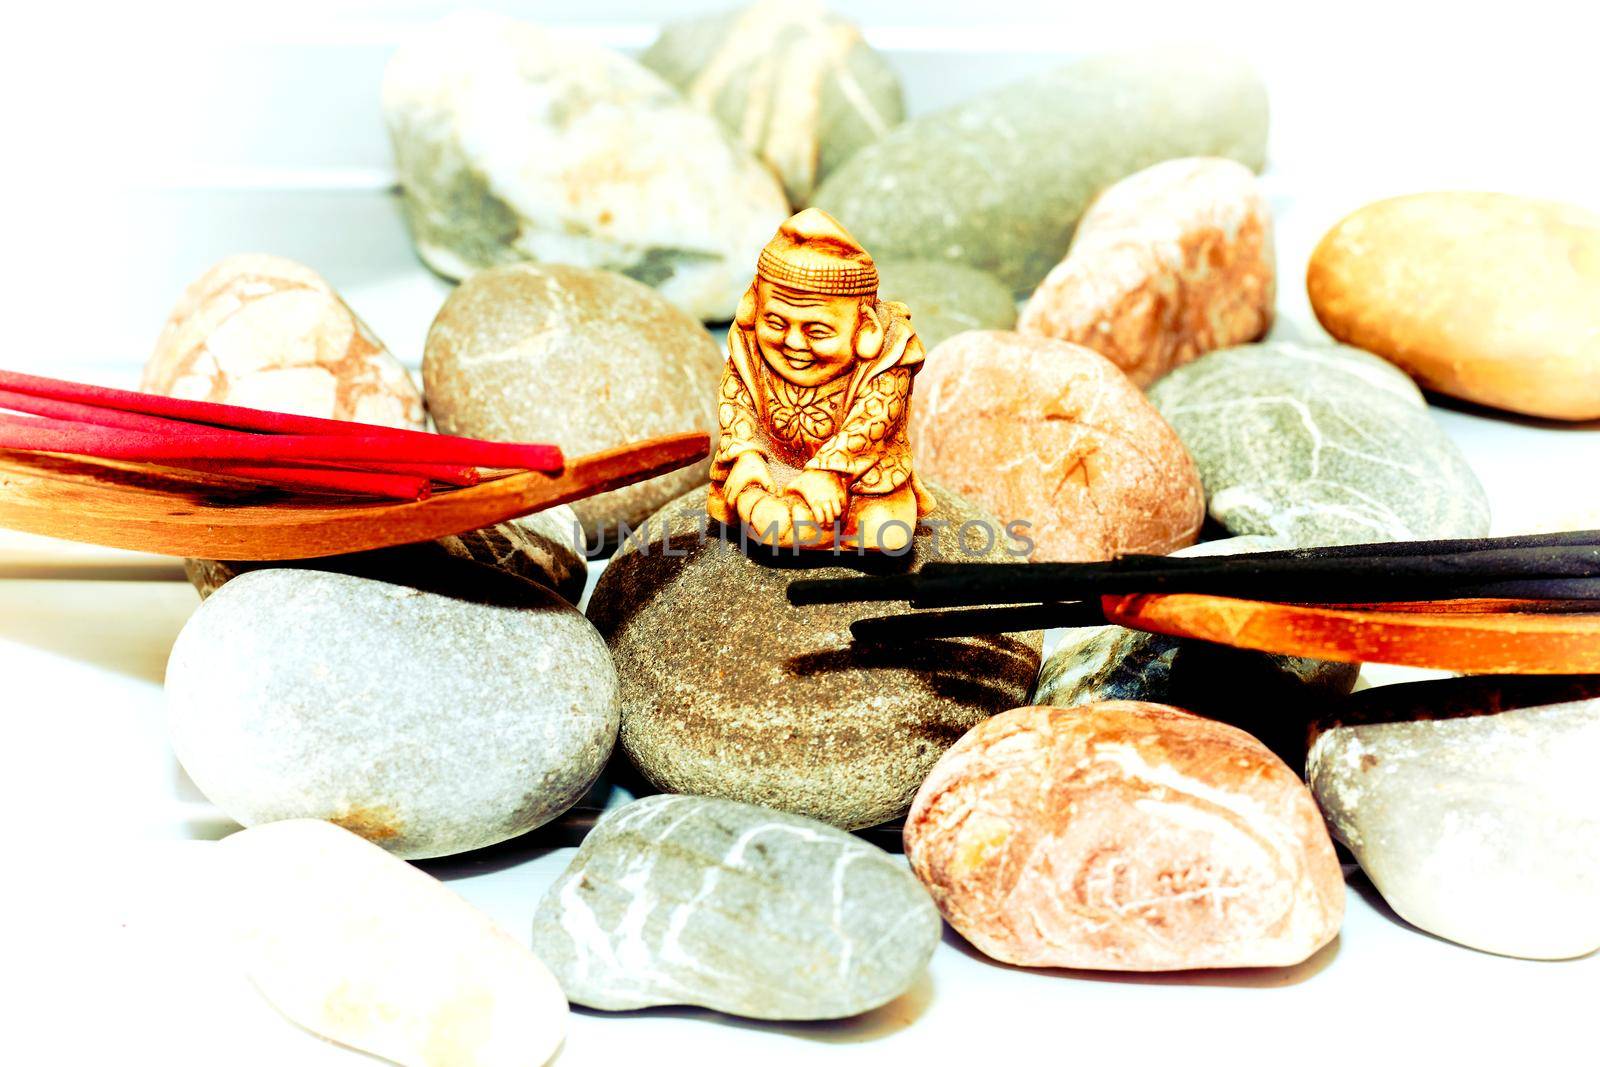 Think deeply or focus ones mind for a period of time, in silence, for religious or spiritual purposes or as a method of relaxation.Statuette of a Buddhist monk among incense and various stones